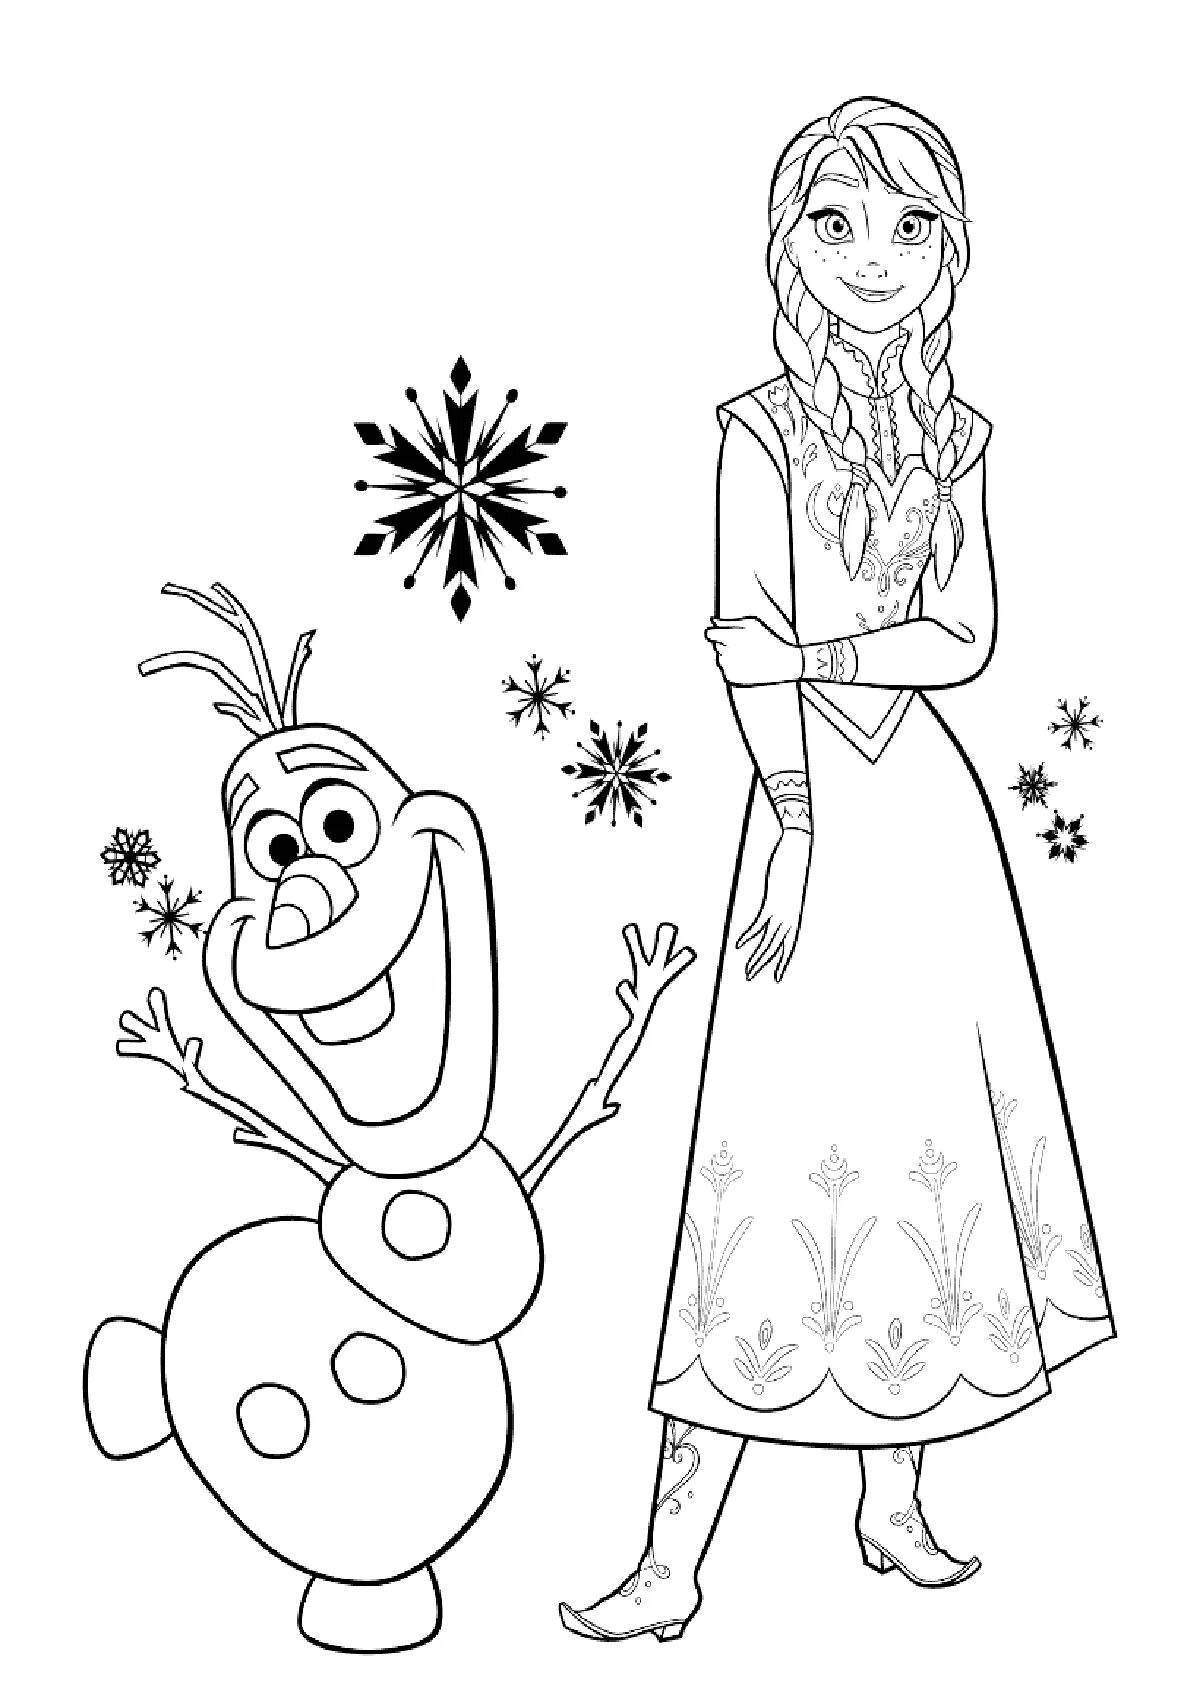 Coloring exalted tin and elsa